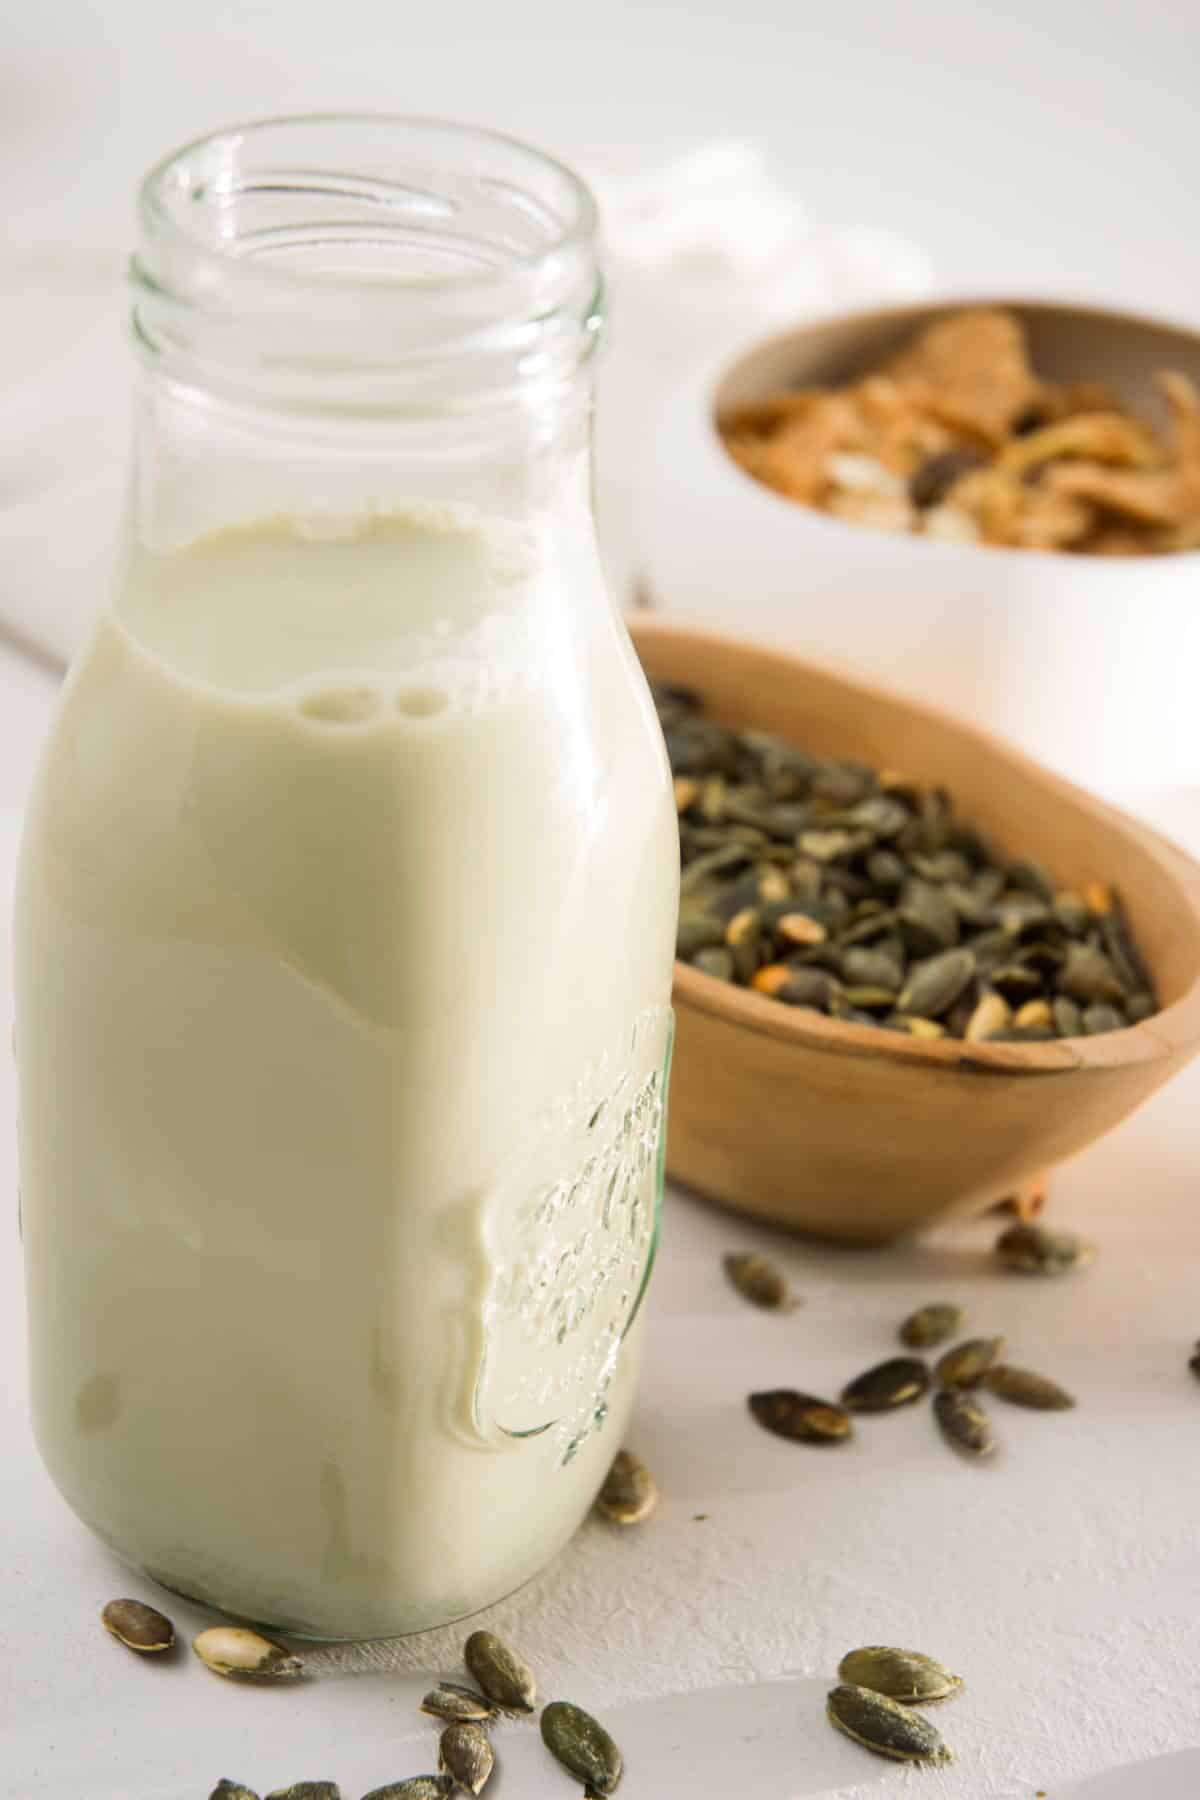 Pumpkin seed milk in a small jar on white background, a bowl of cereal and pumpkin seeds in the background.